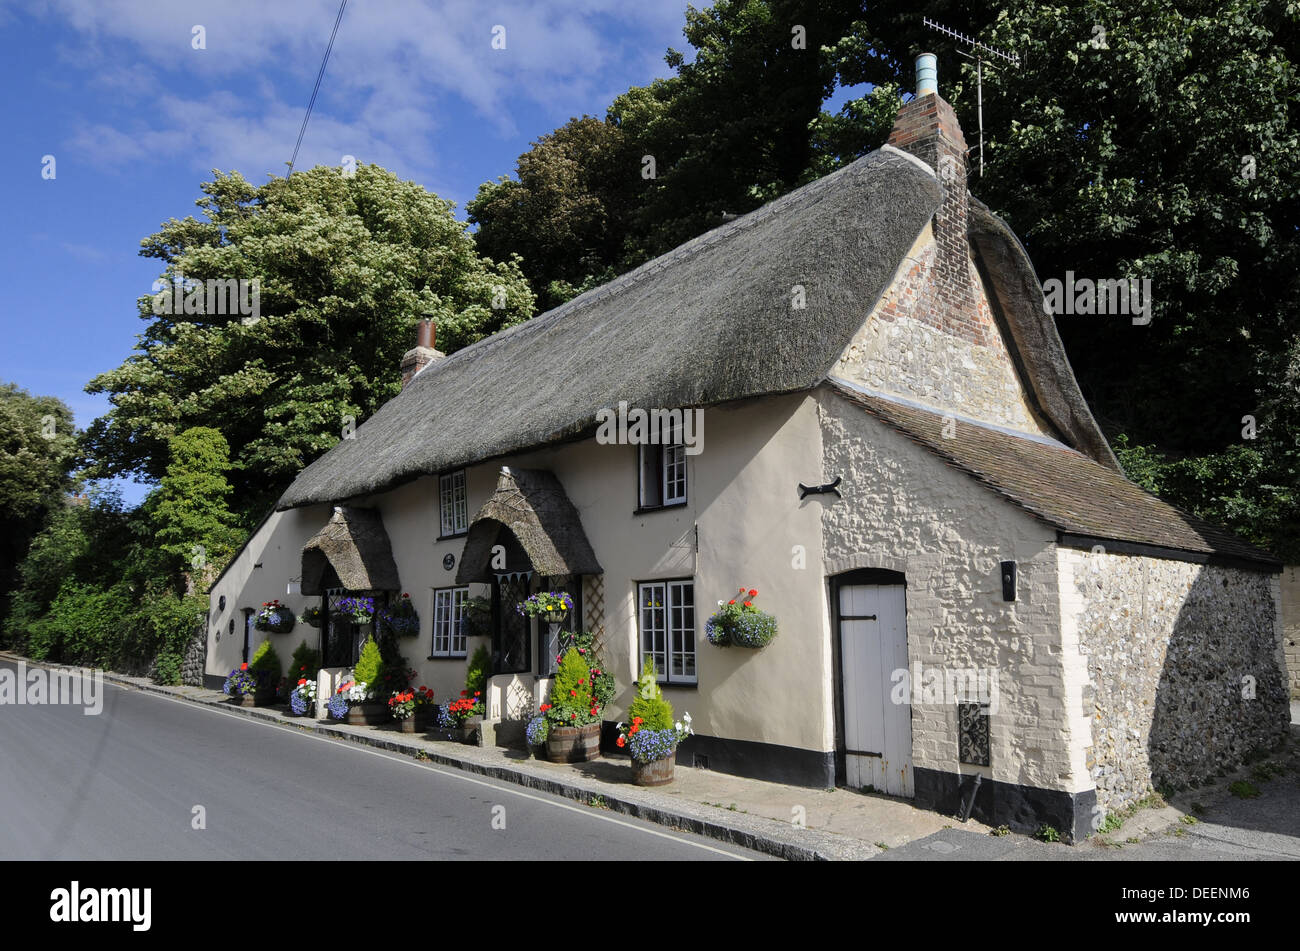 Thatched Cottages West Lulworth Isle of Purbeck Jurassic Coast Dorset England Stock Photo